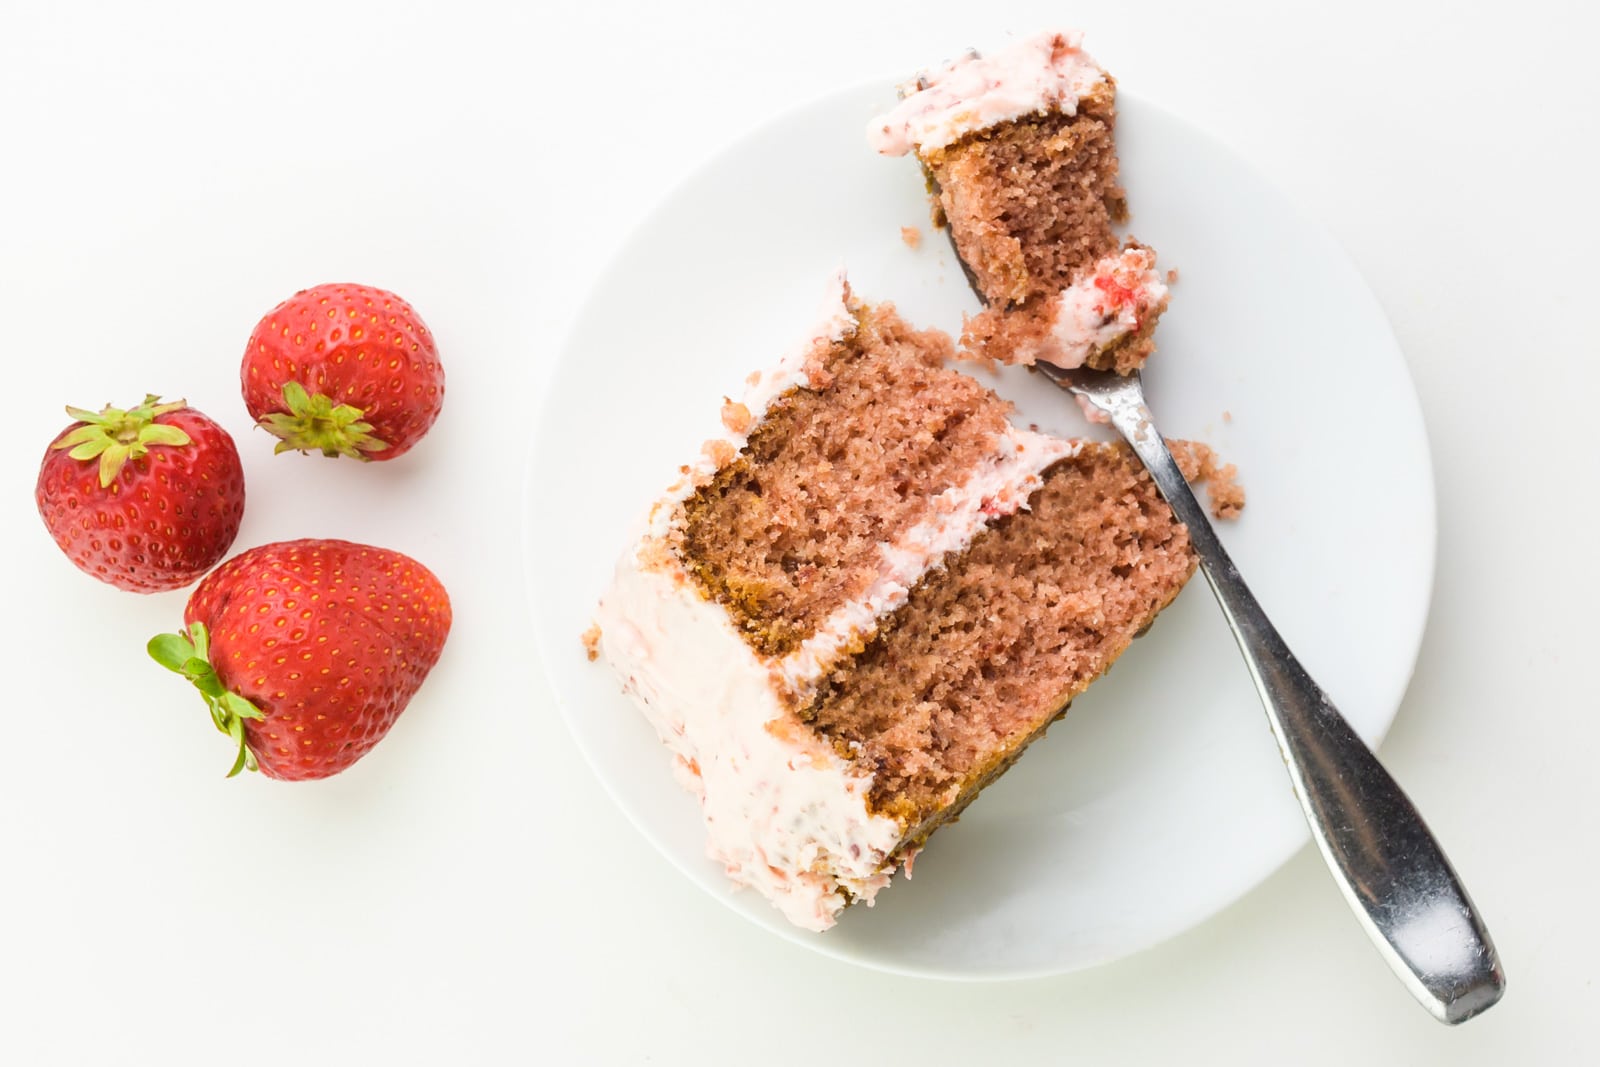 Looking down on a slice of layered strawberry cake with a bite sitting on a fork next to it. There are three fresh strawberries sitting next to it.